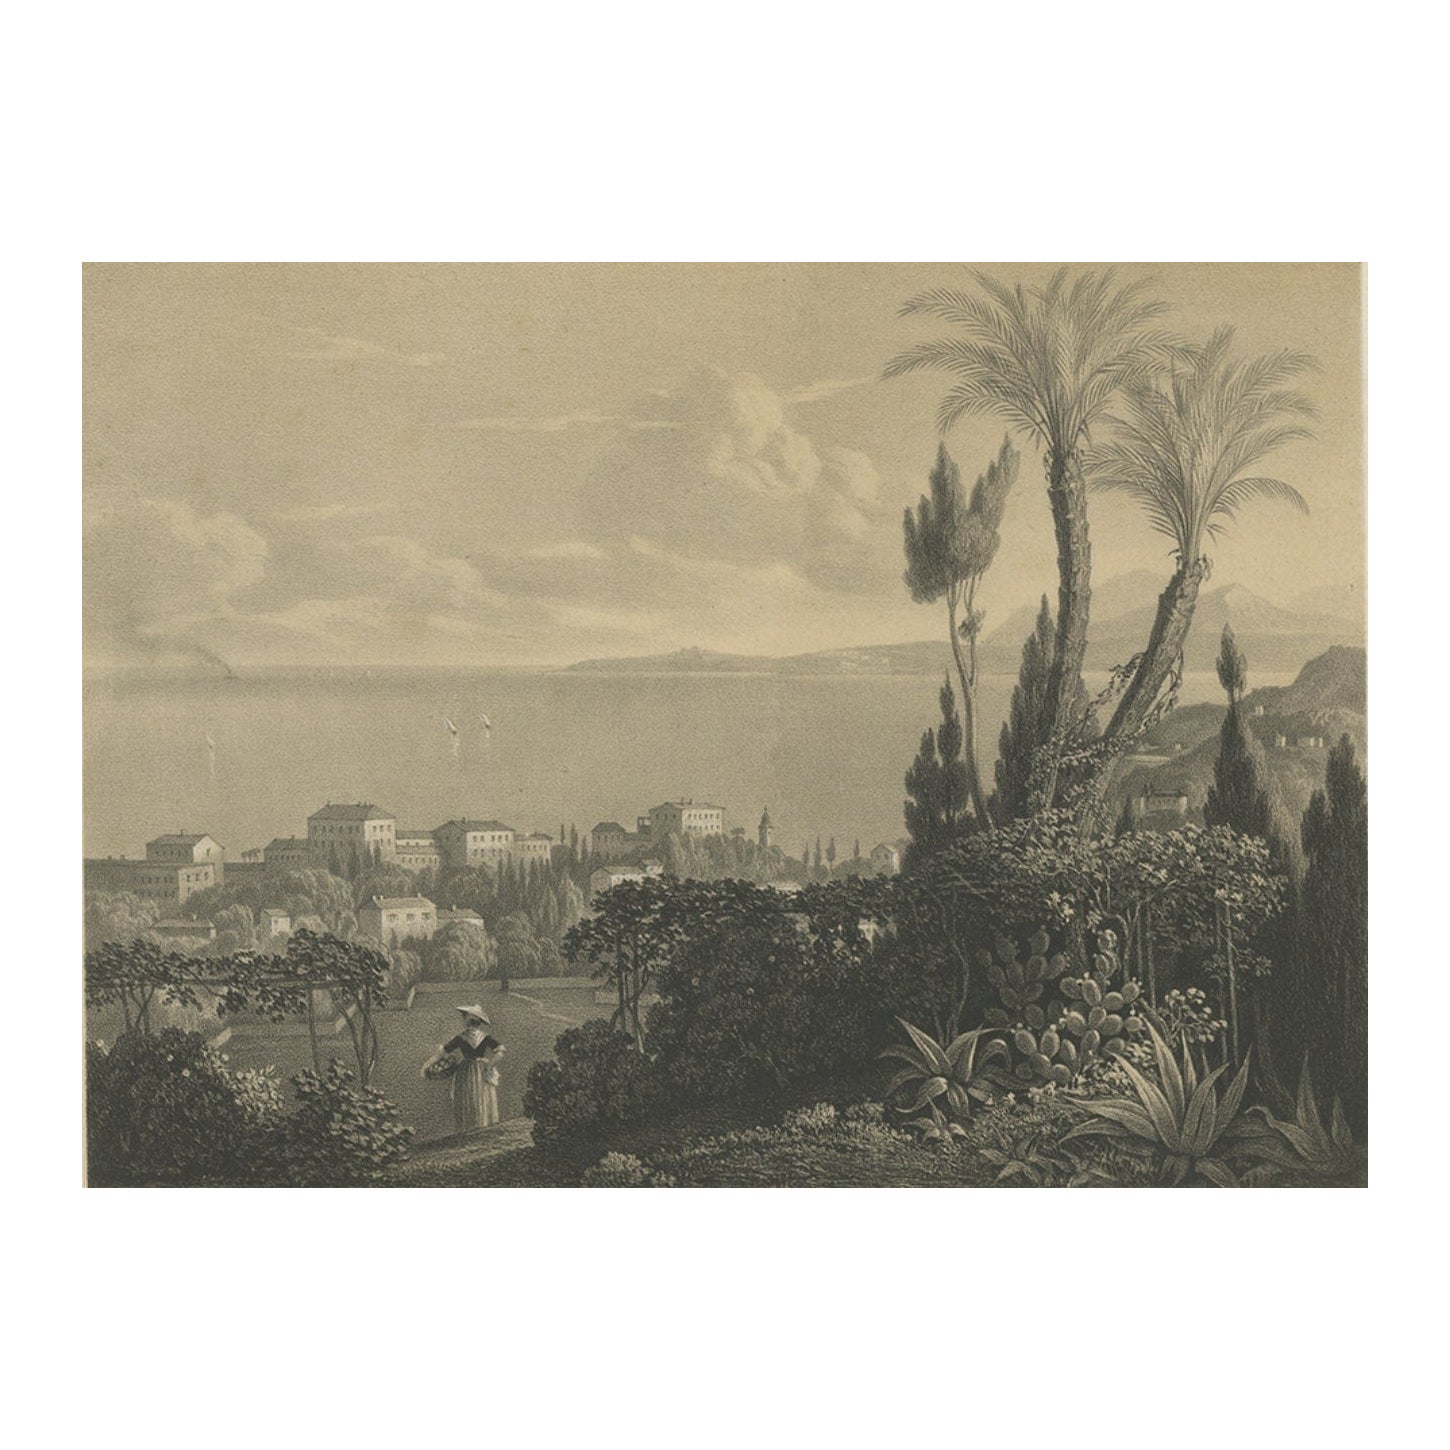 Antique Print of the City of Nice in France, c.1840